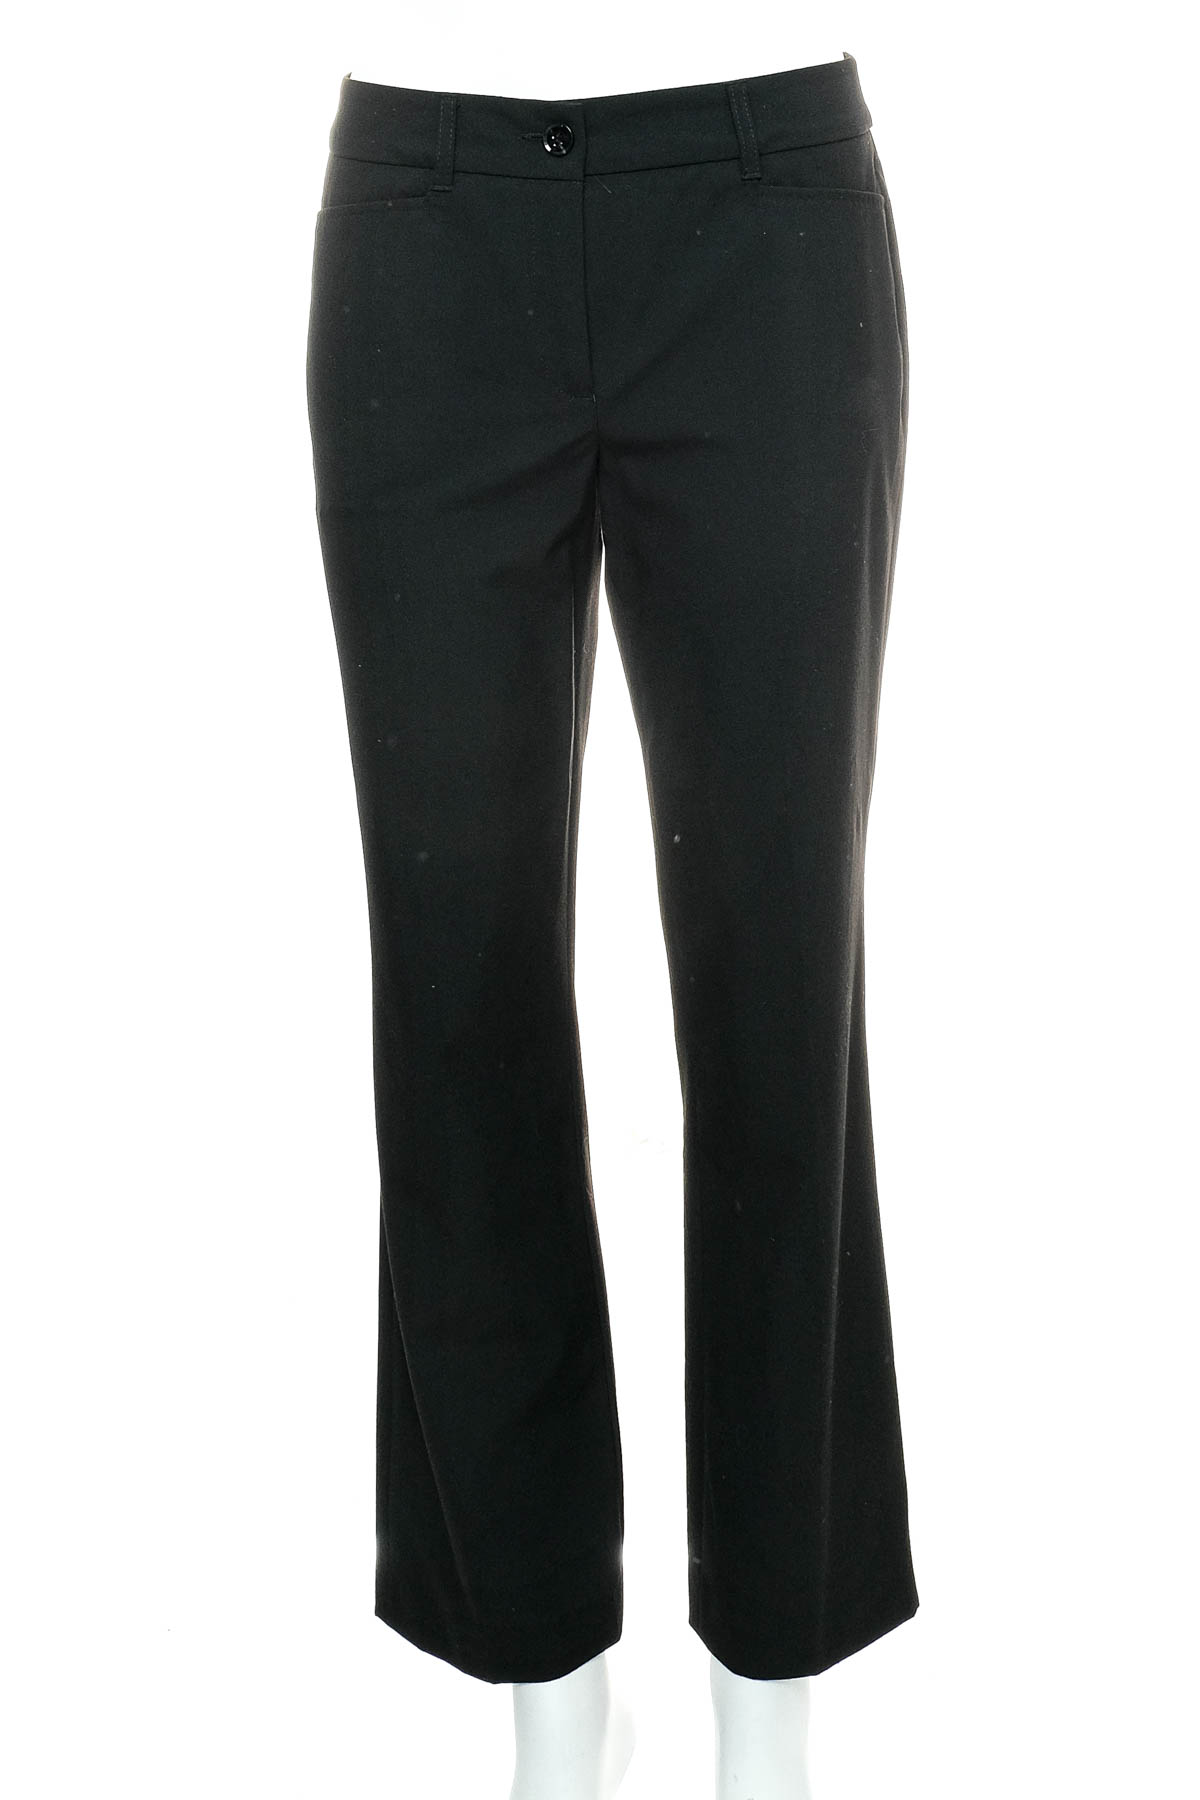 Women's trousers - S.Oliver - 0